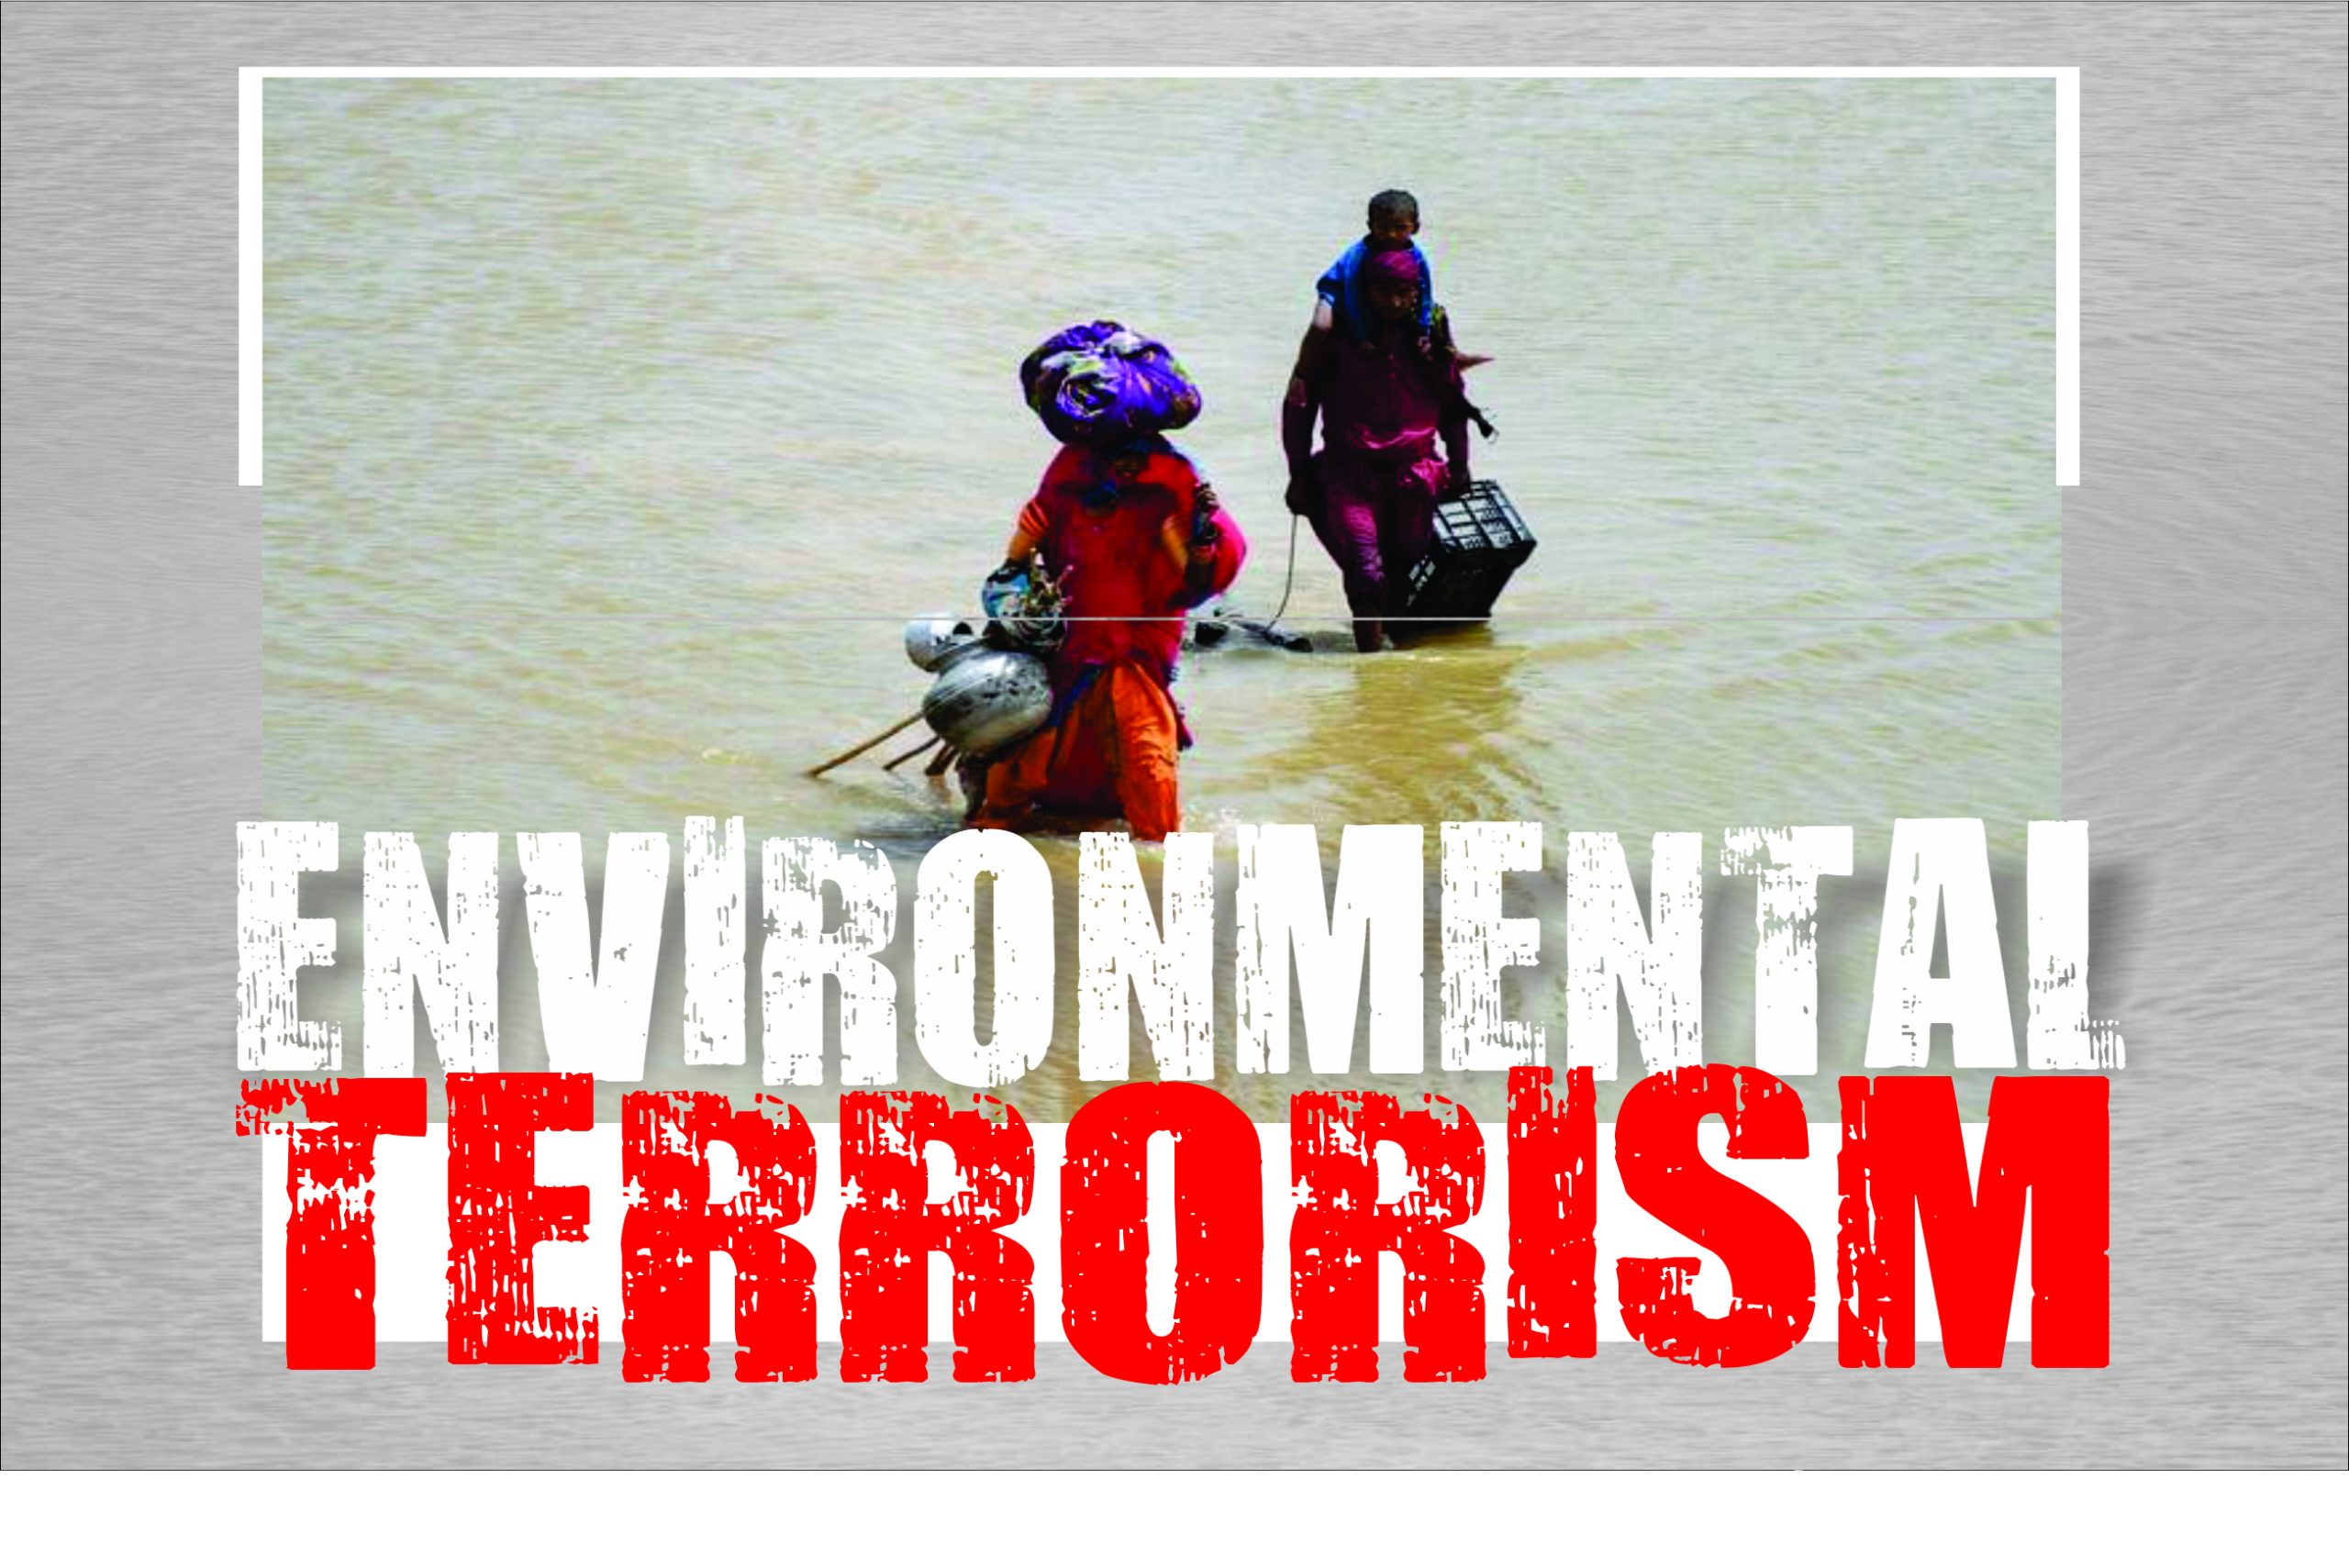 Read more about the article Environmental Terrorism